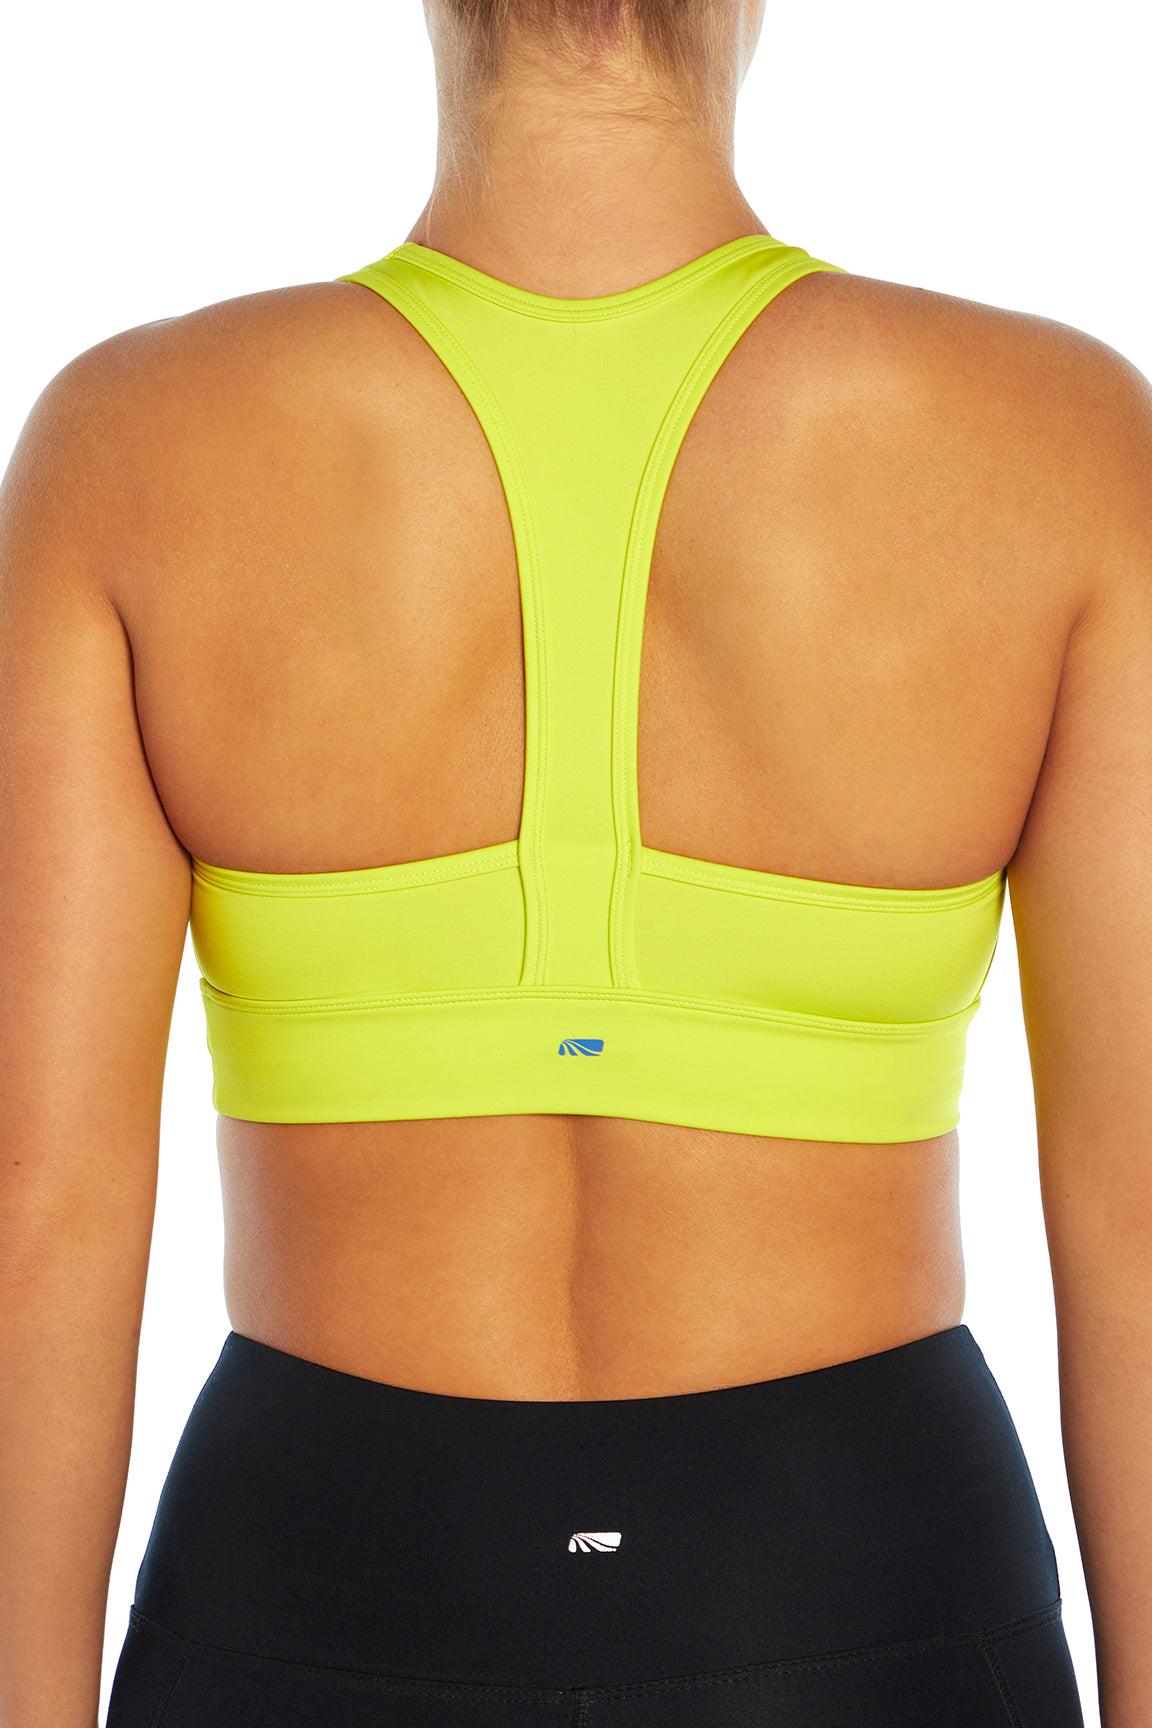 Marika Medium Impact Sports Bra Non-Wired Removable Padding Gym Top Cycle House